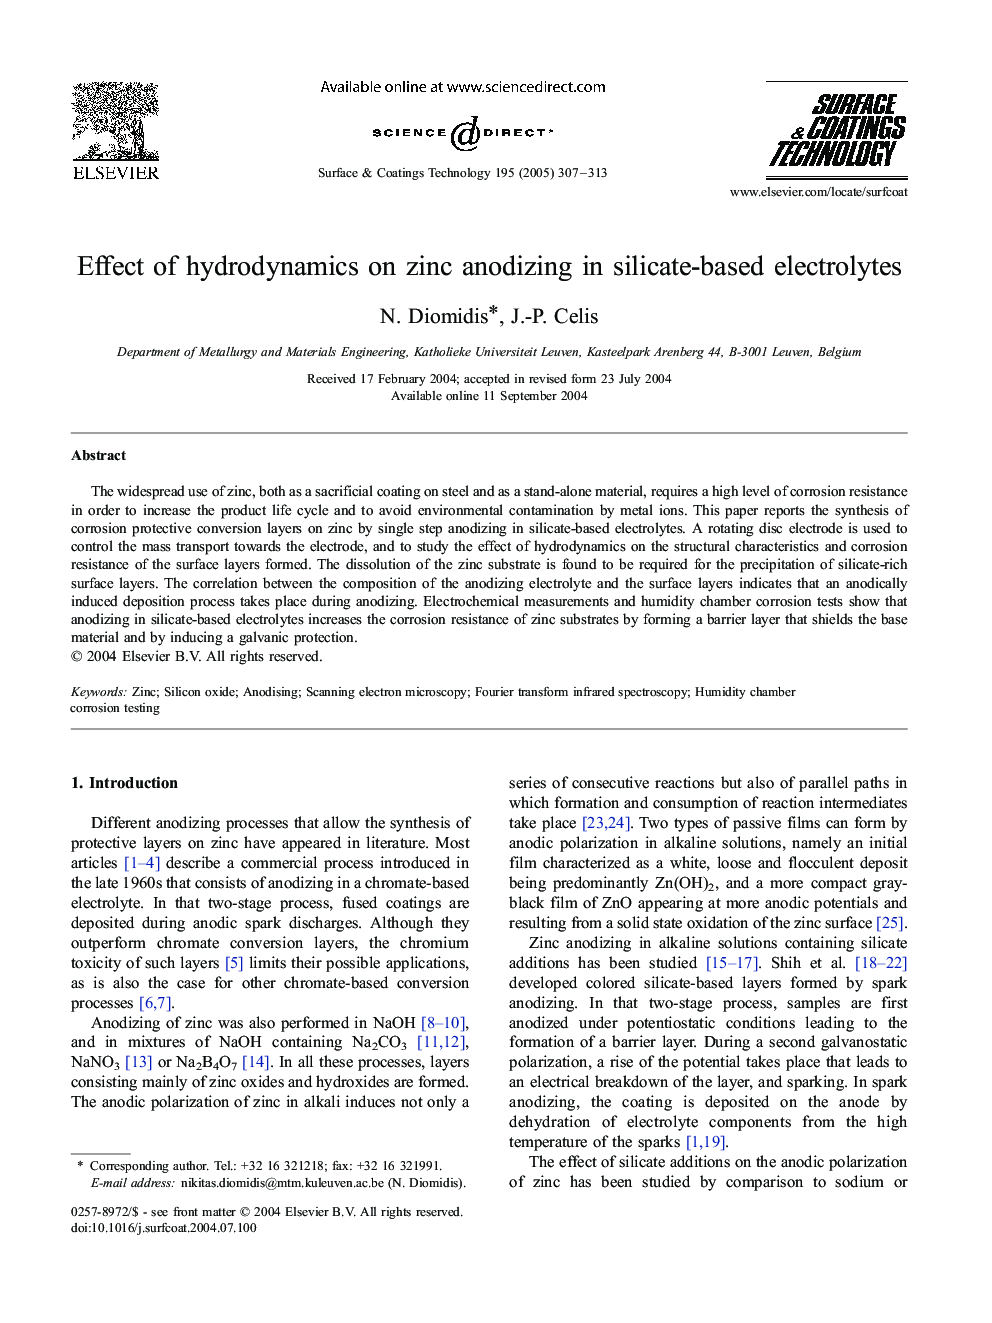 Effect of hydrodynamics on zinc anodizing in silicate-based electrolytes